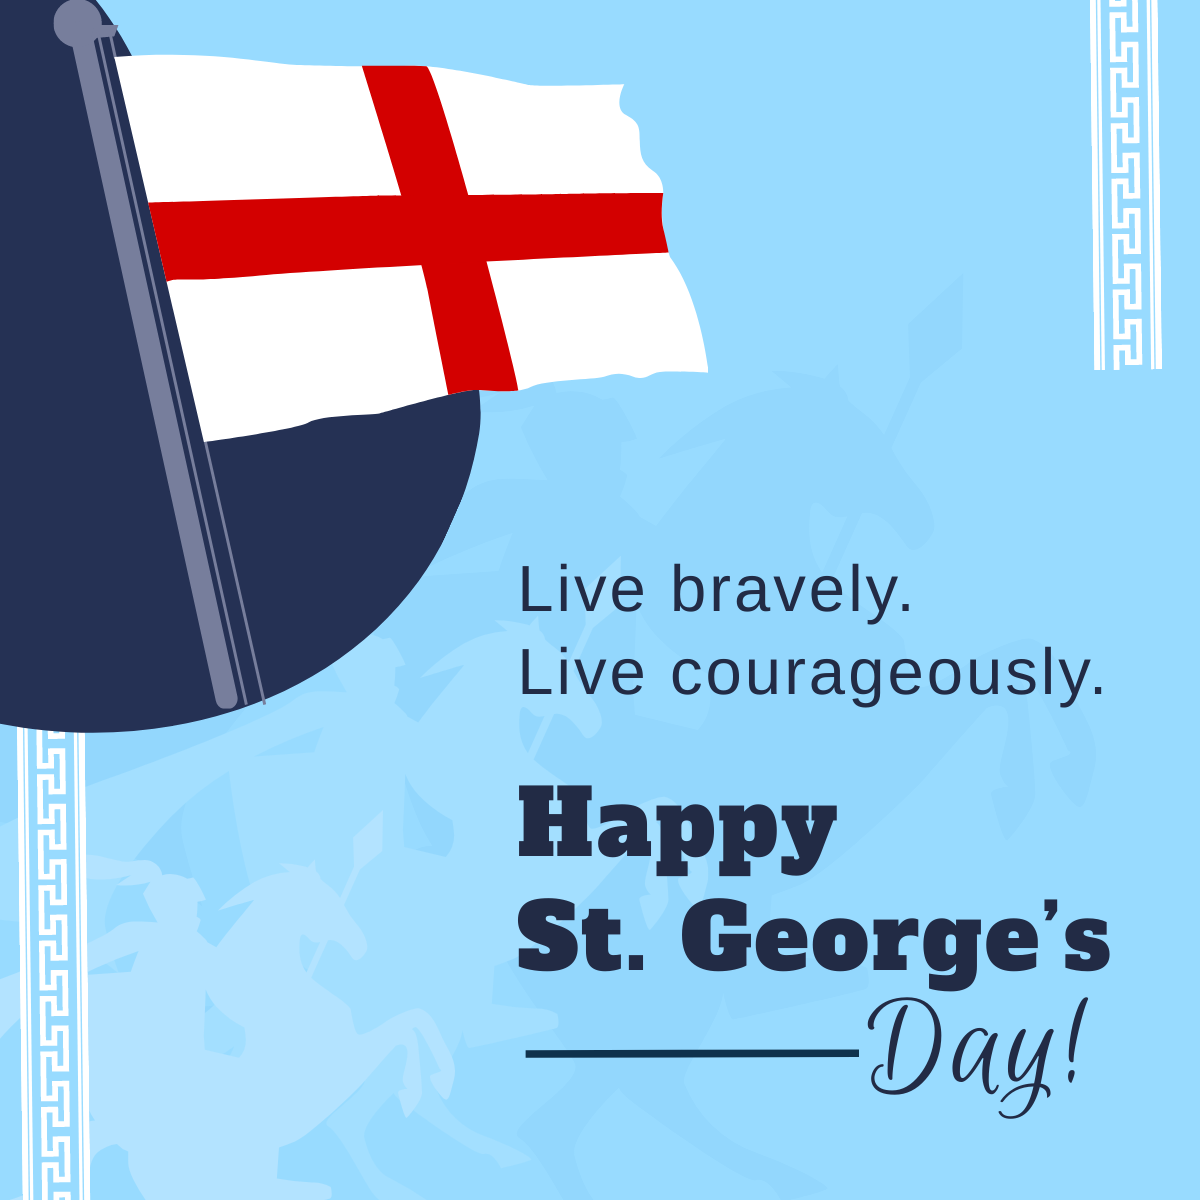 St. George's Day Linkedin Post Template